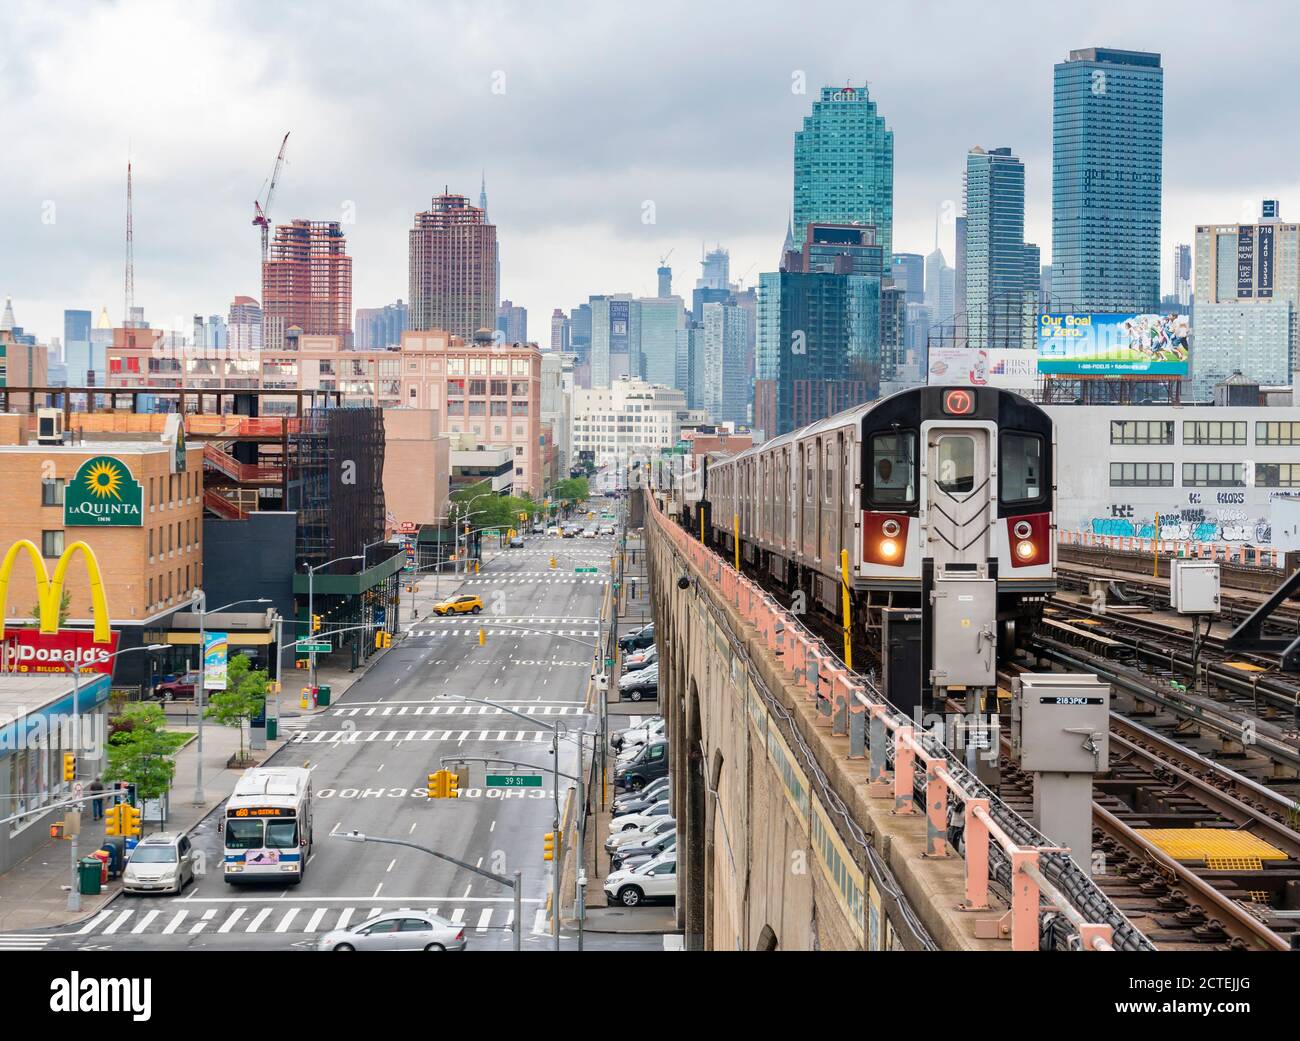 Train arriving at a station in New York Stock Photo